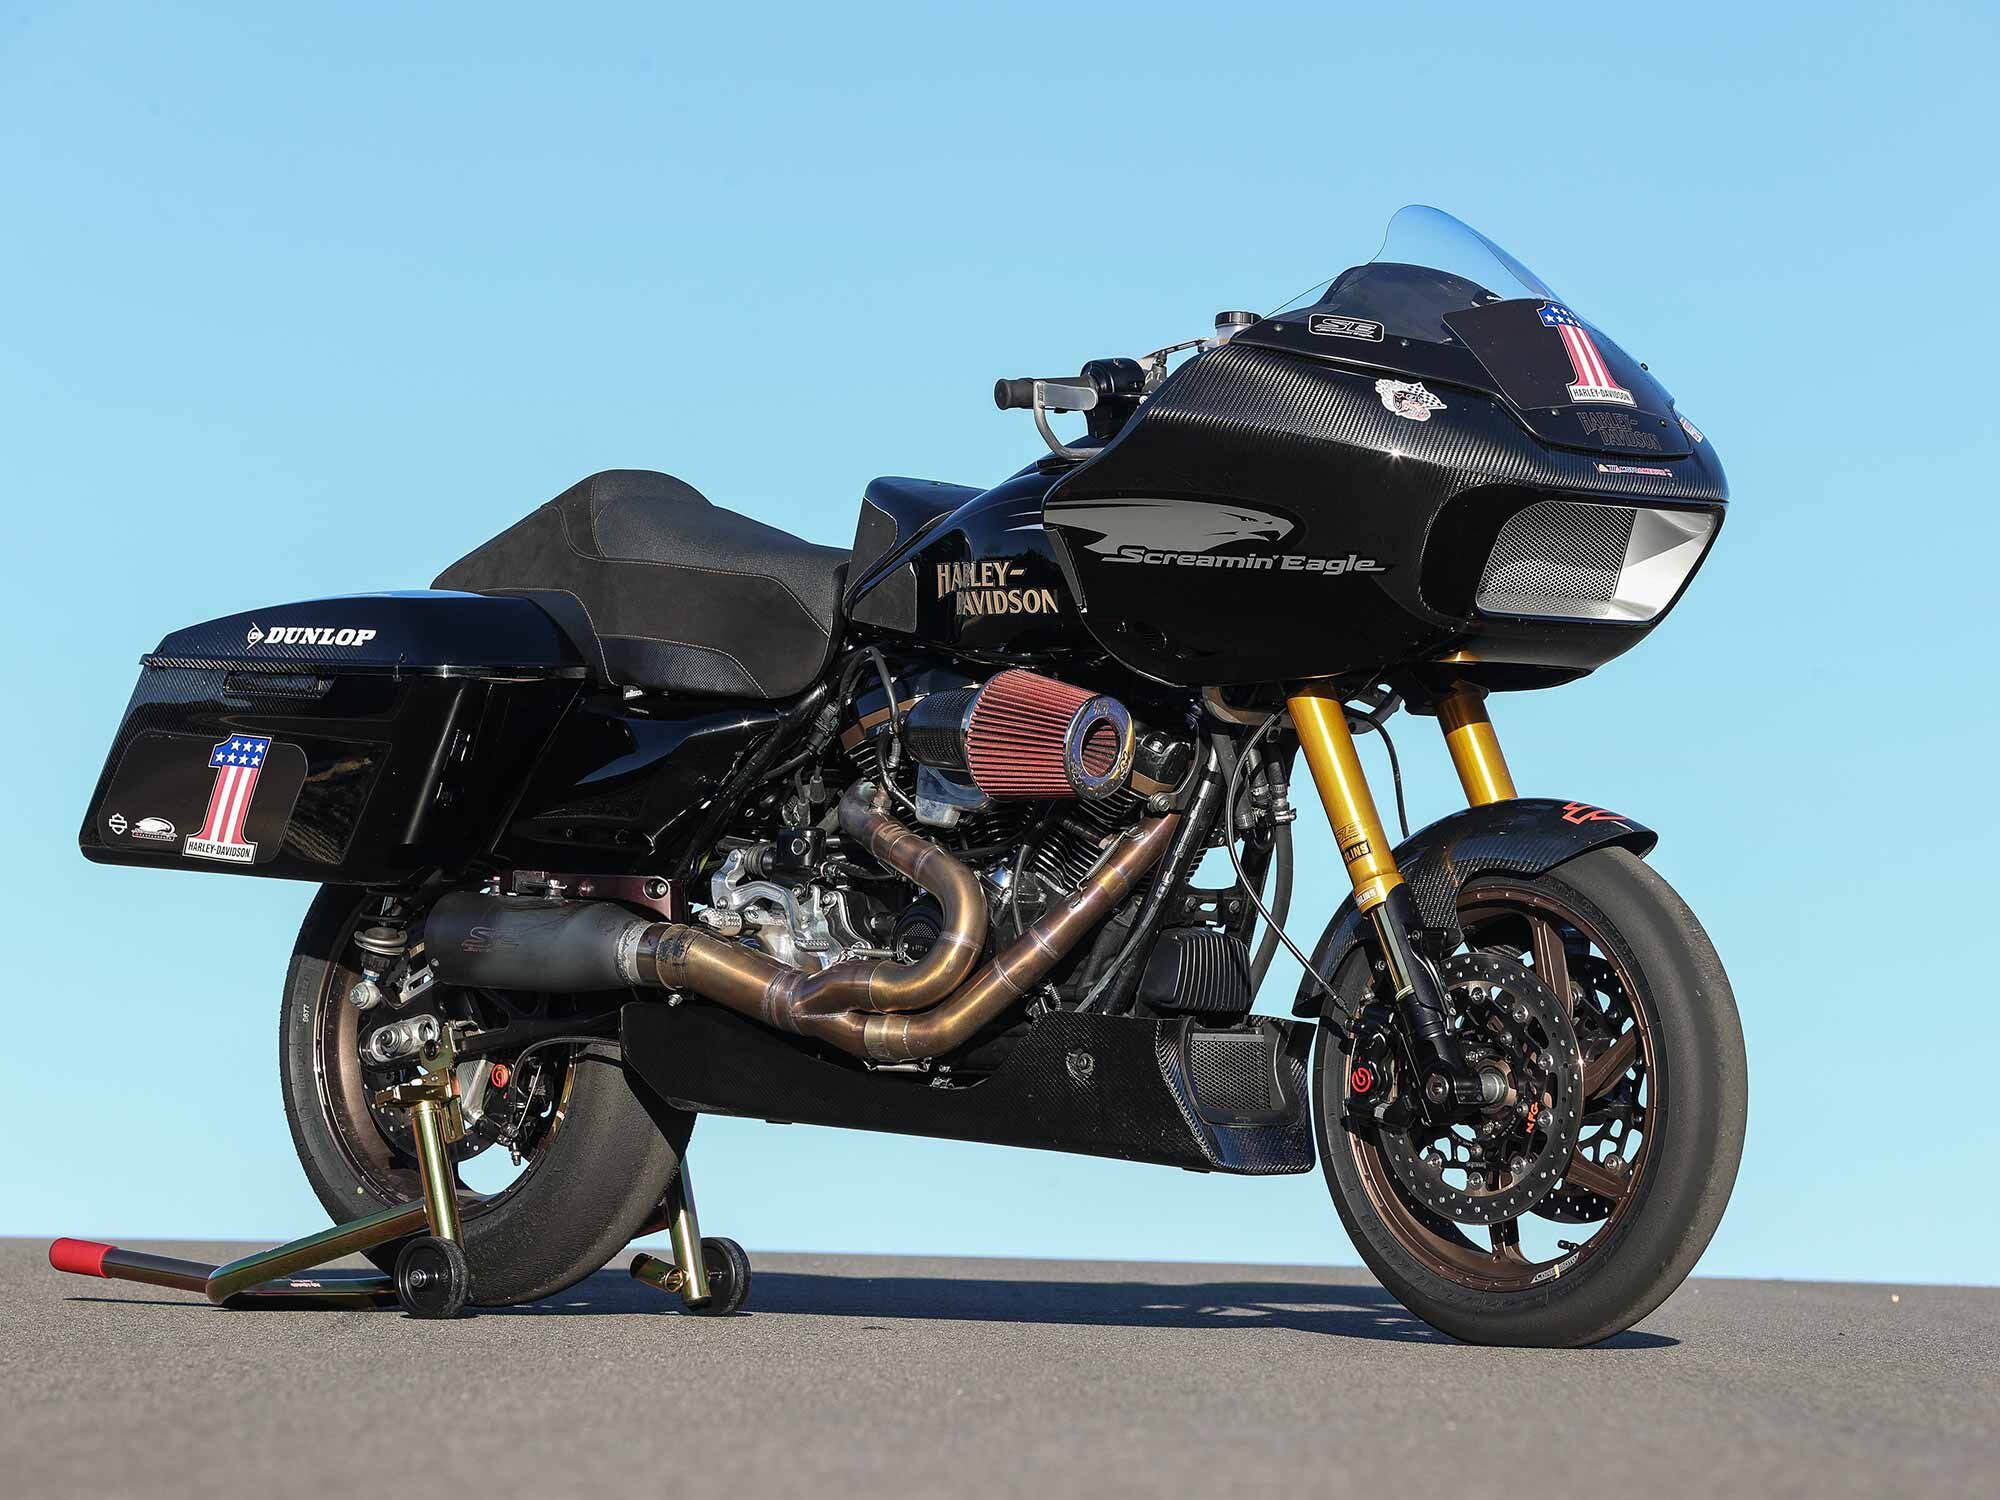 The Harley-Davidson Screamin’ Eagle Road Glide Special factory-built racebike is an all-American superbike, just built from a different platform.